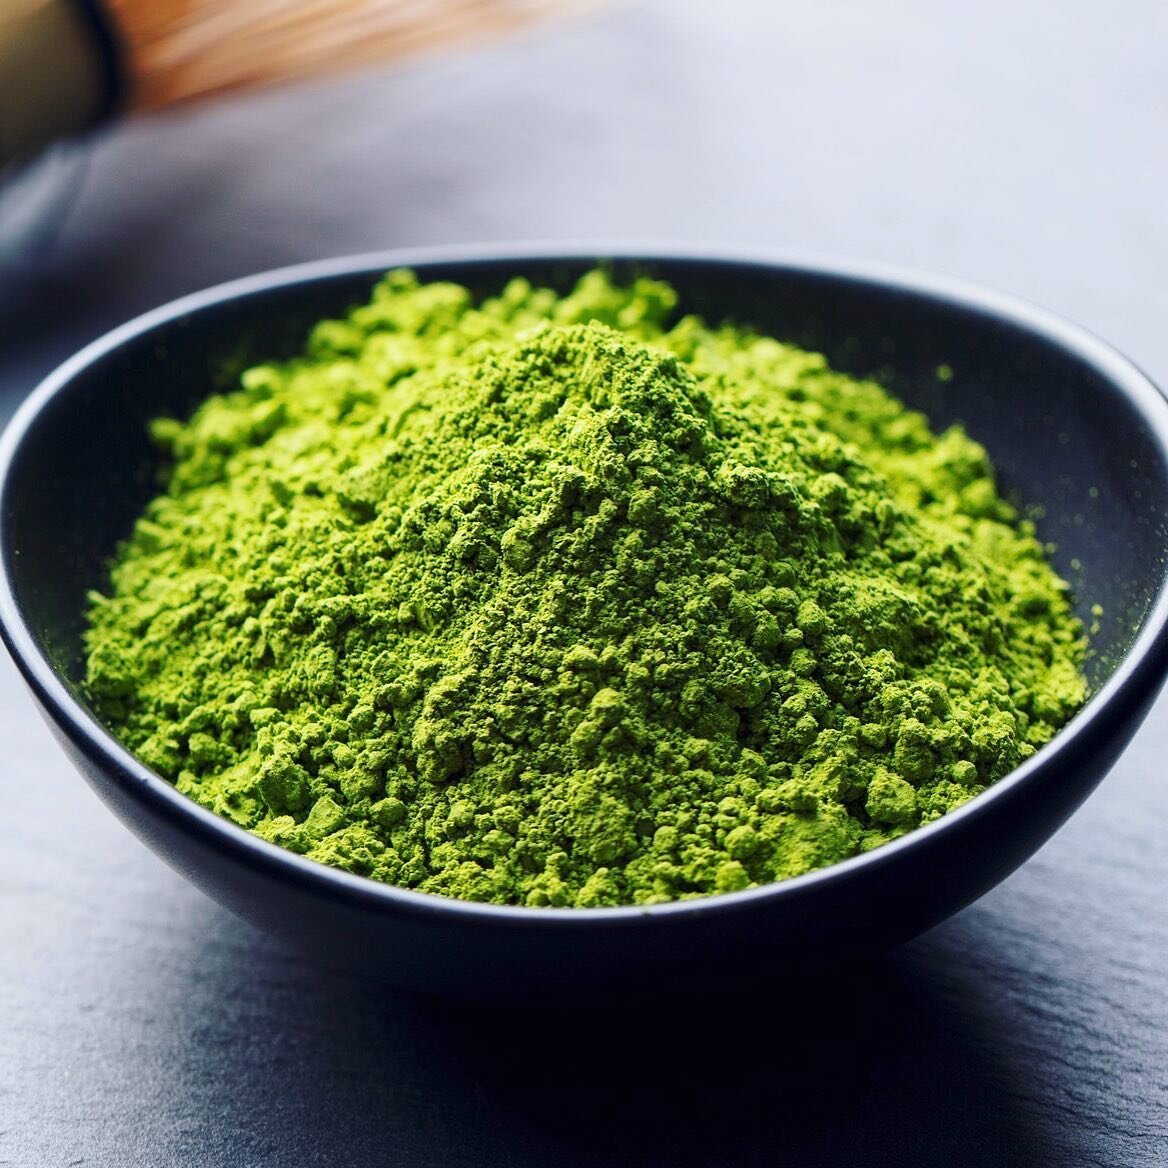 Pure, premium, organic matcha 20% off until New Years day!! 💚😱 Use HAPPYNY22 at checkout 😍 #shoshinmatcha #drinkmatchaplanttrees